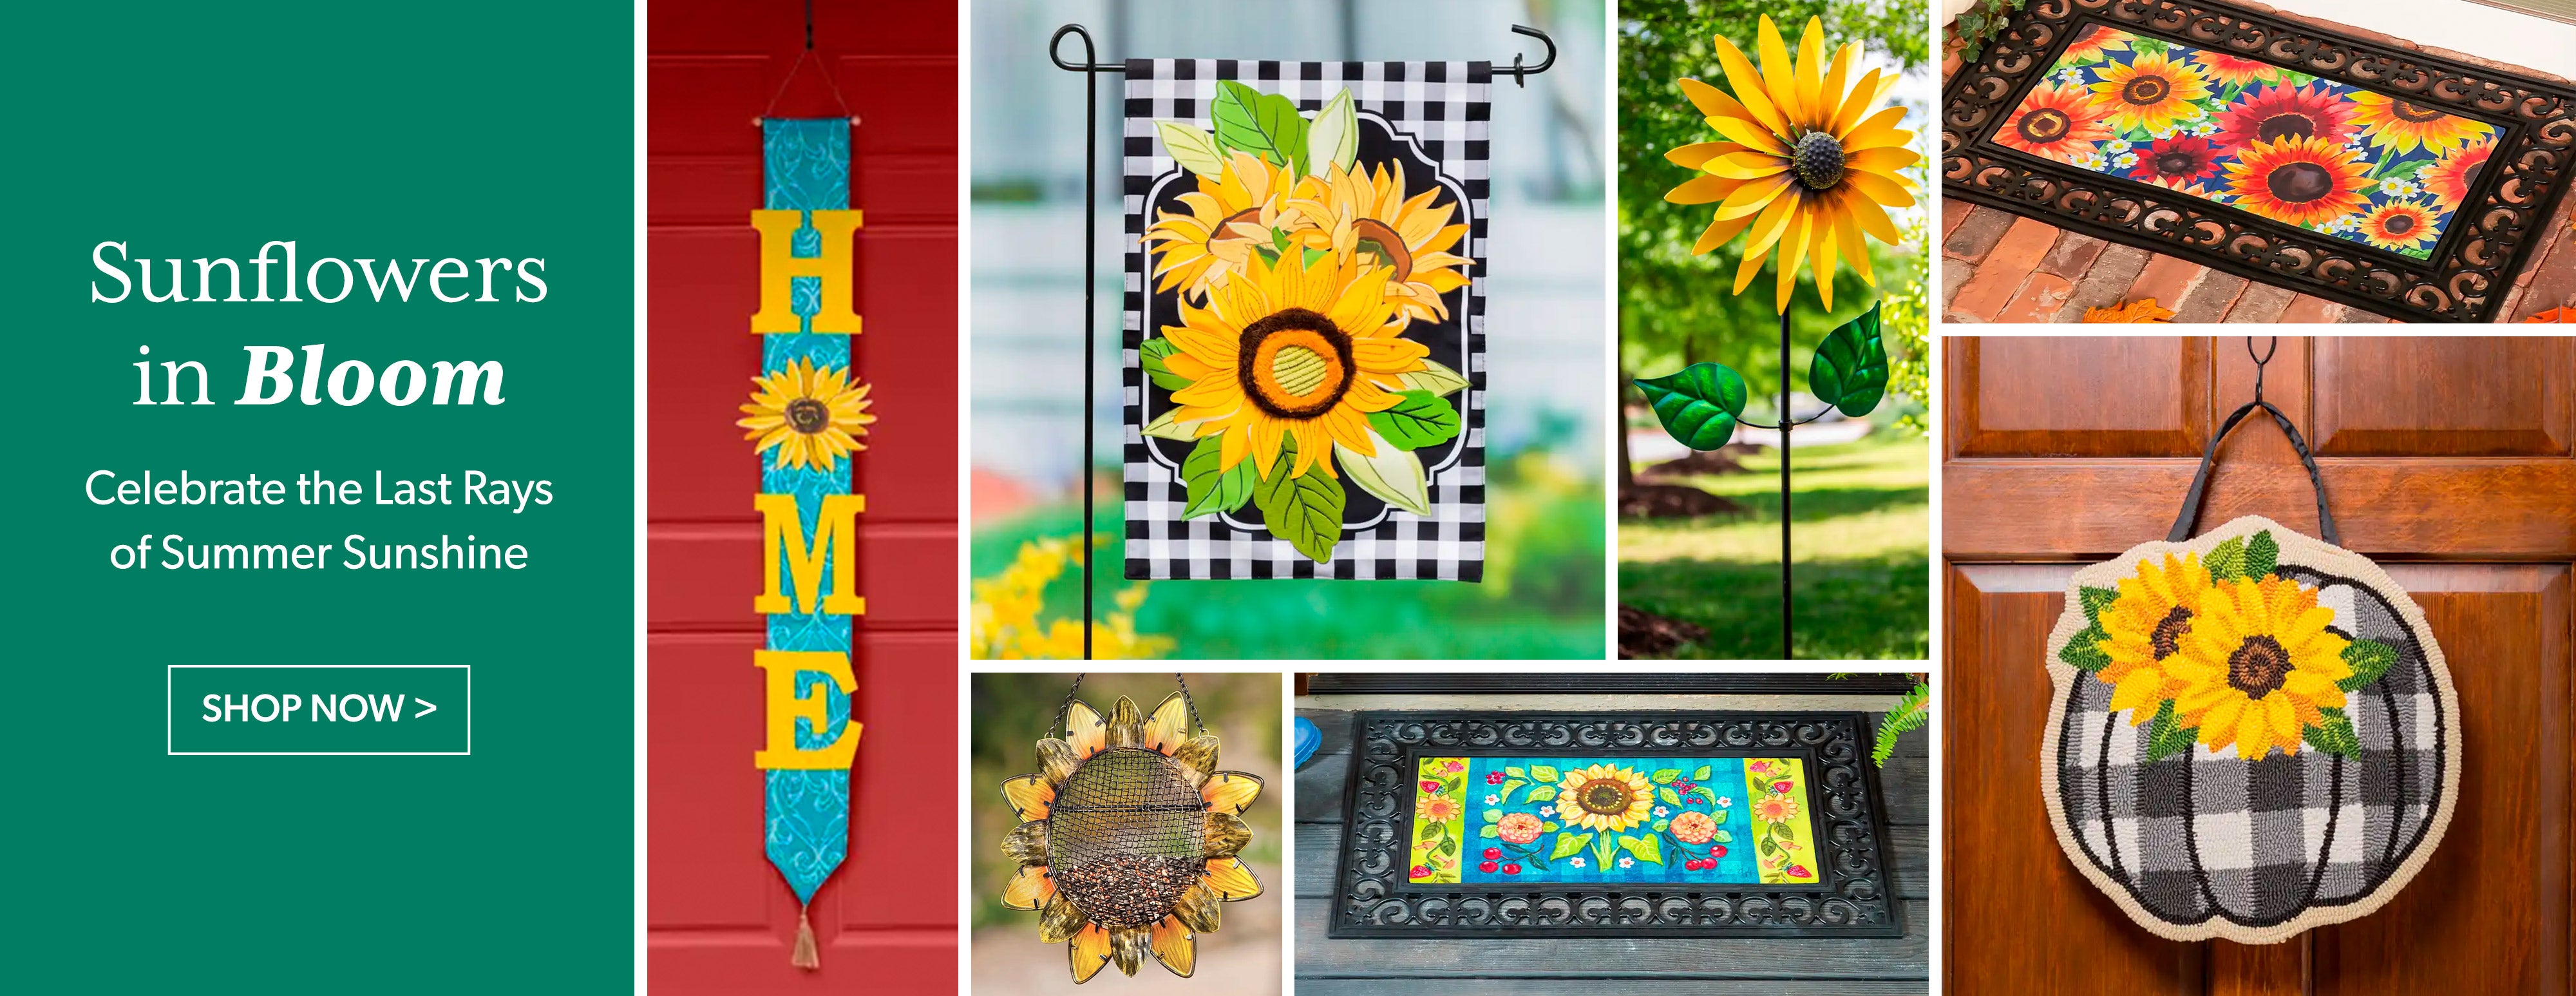 Celebrate that last rays of Summer Sunflowers. Shop Now